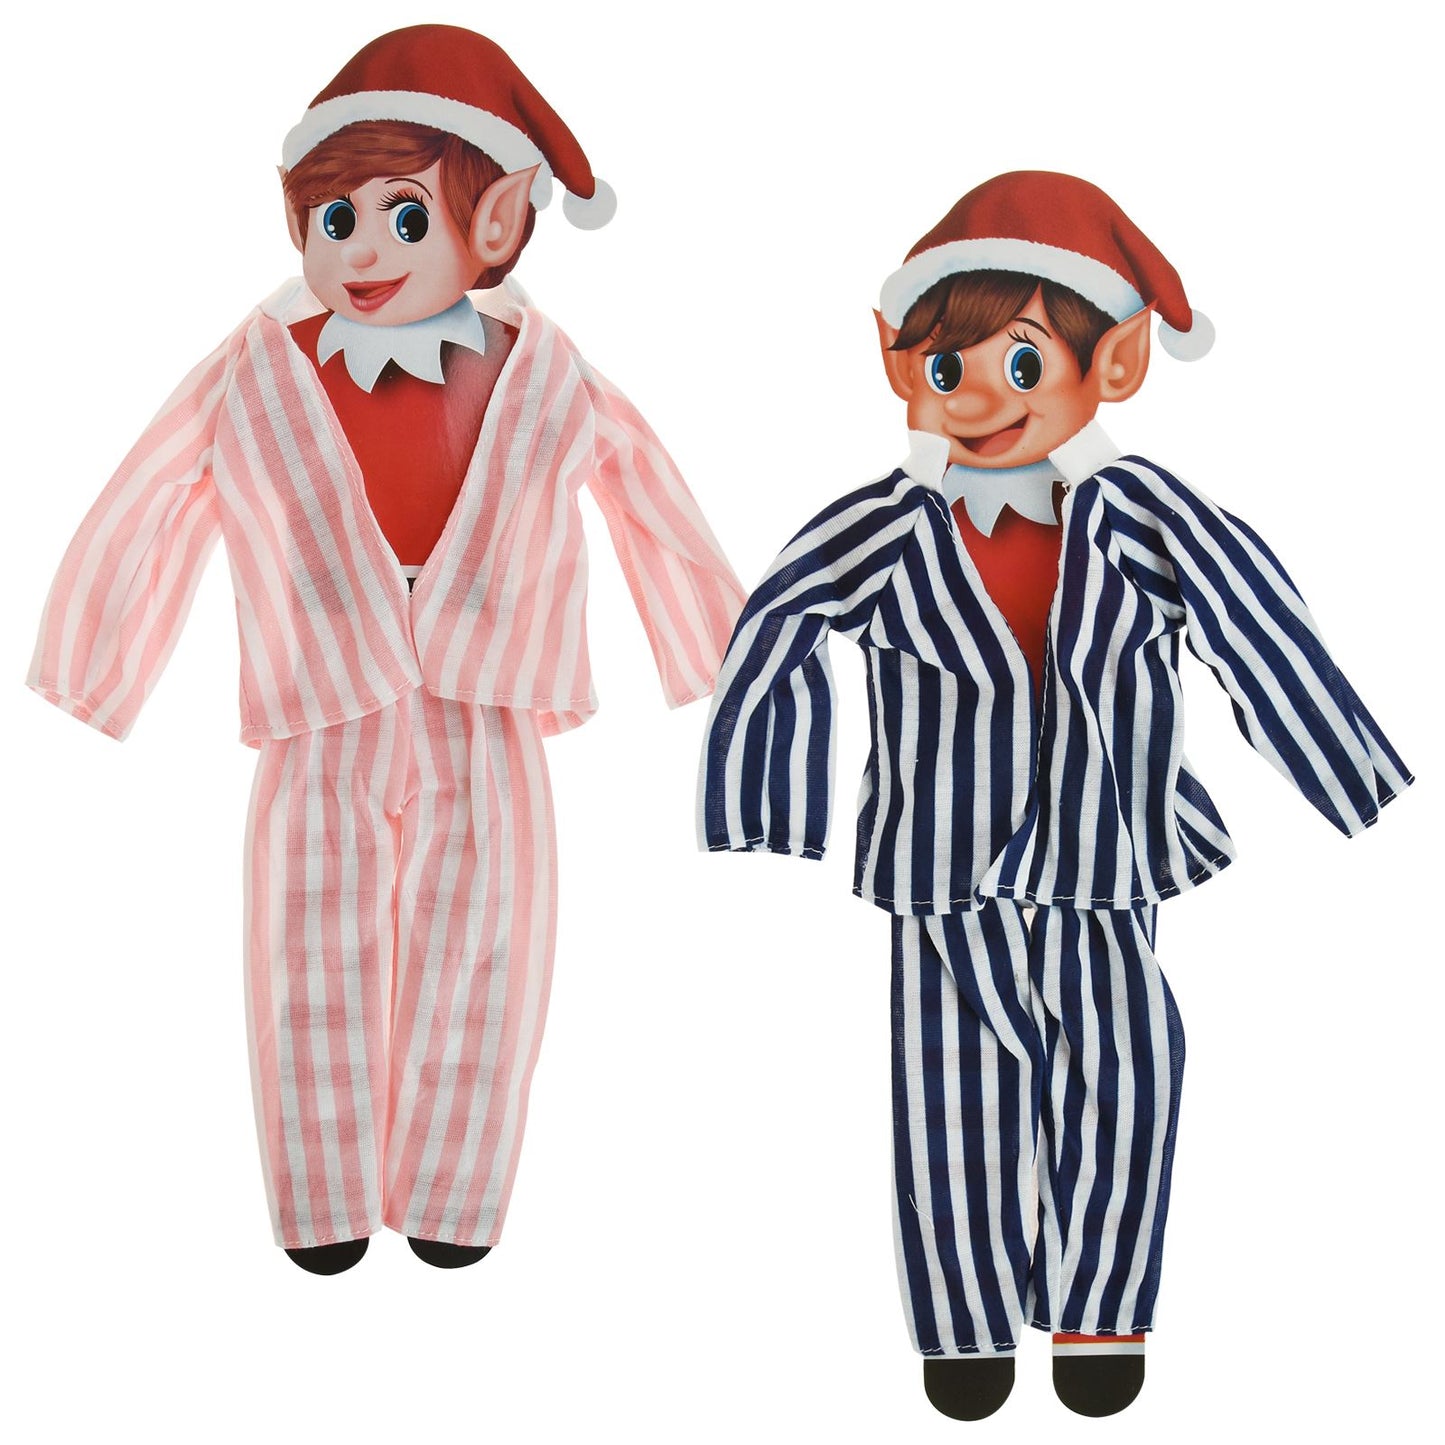 Get in the Holiday Spirit with Elf Striped Pyjamas